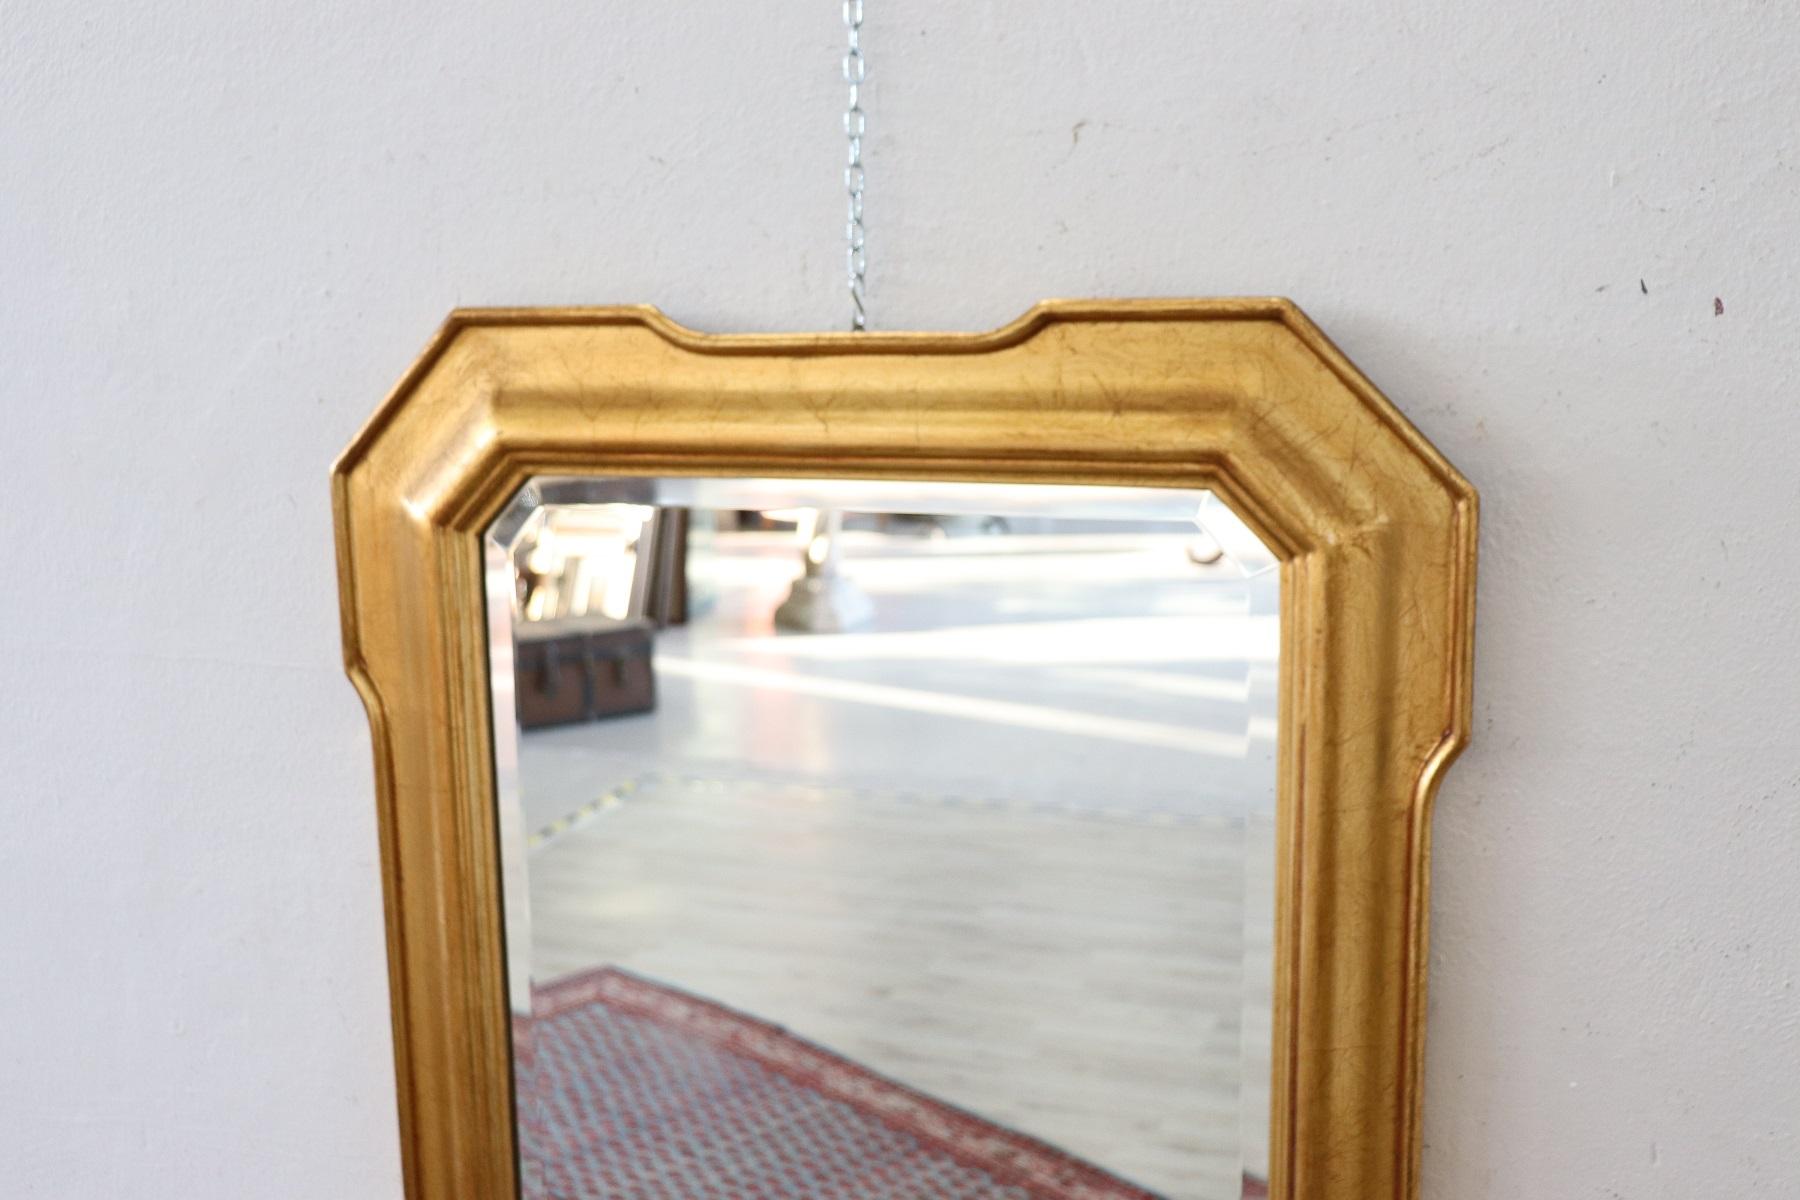 Elegant Italian wall mirror in finely gilded wood. Excellent condition ready to be inserted in your beautiful home.